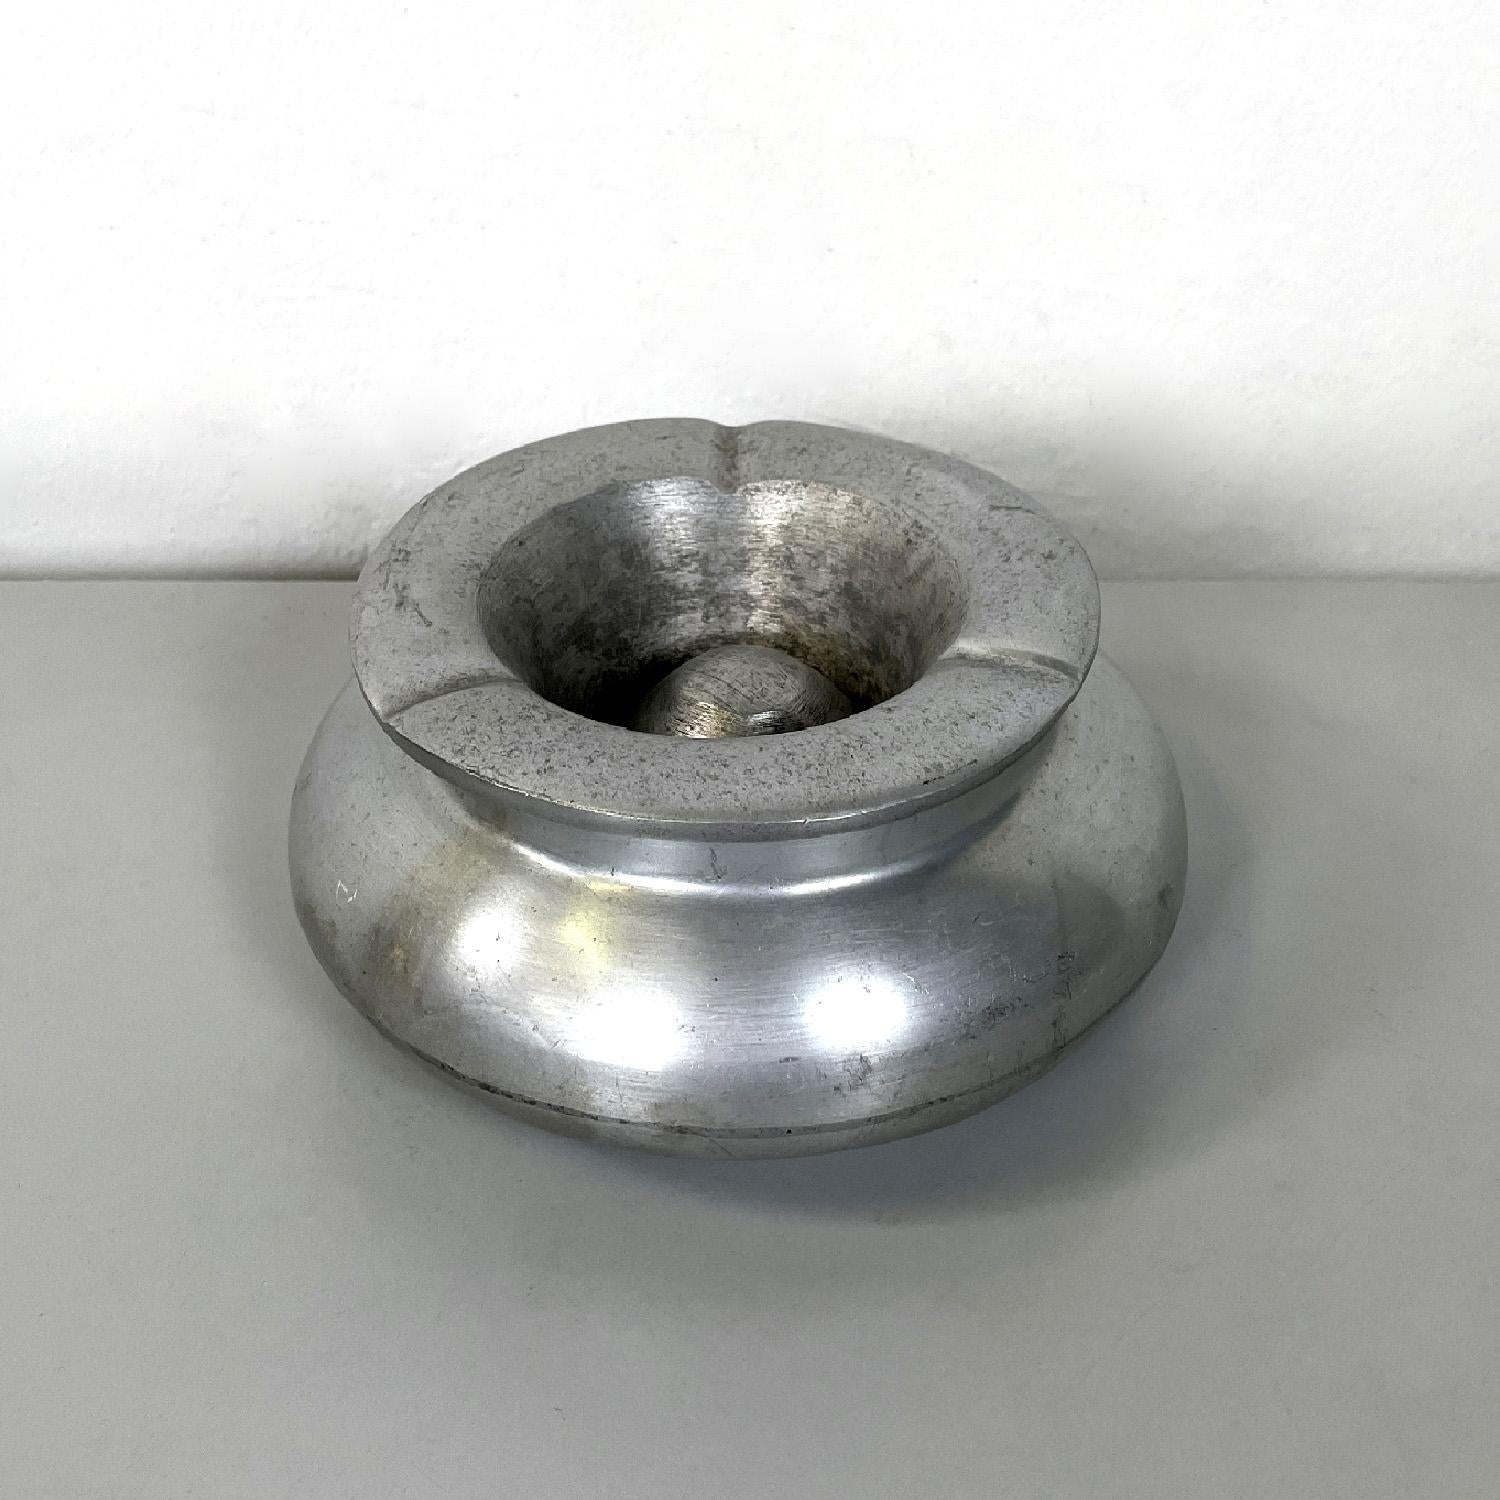 Italian Art Deco round aluminum ashtray with removable top, 1930s
Round ashtray entirely in aluminium. It has rounded lines that descend towards the bottom, to reach a small step on the ground. The upper part is removable and has three recesses for